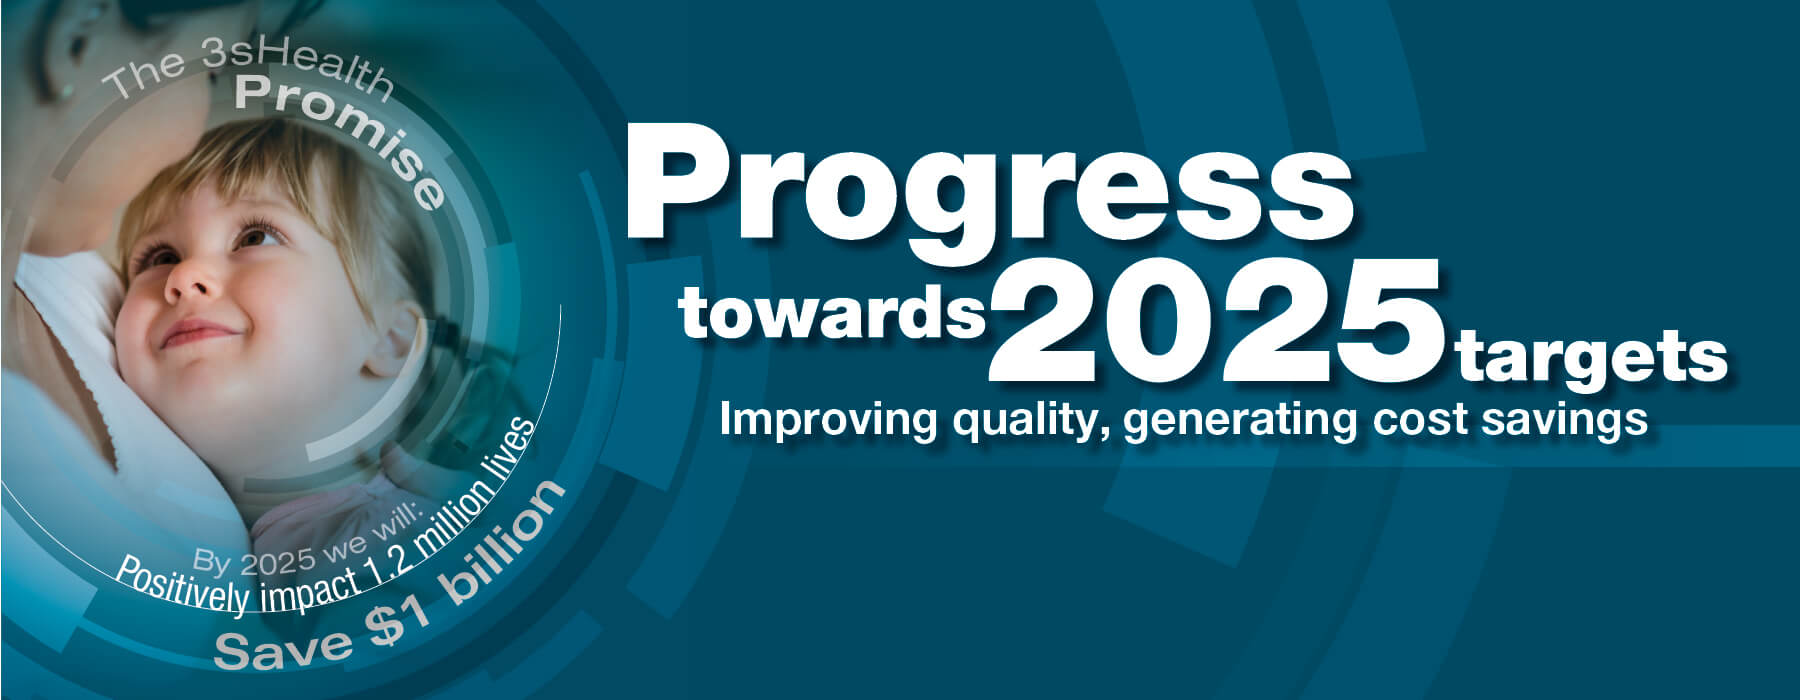 3sHealth makes significant progress towards 2025 targets by improving quality, generating cost savings